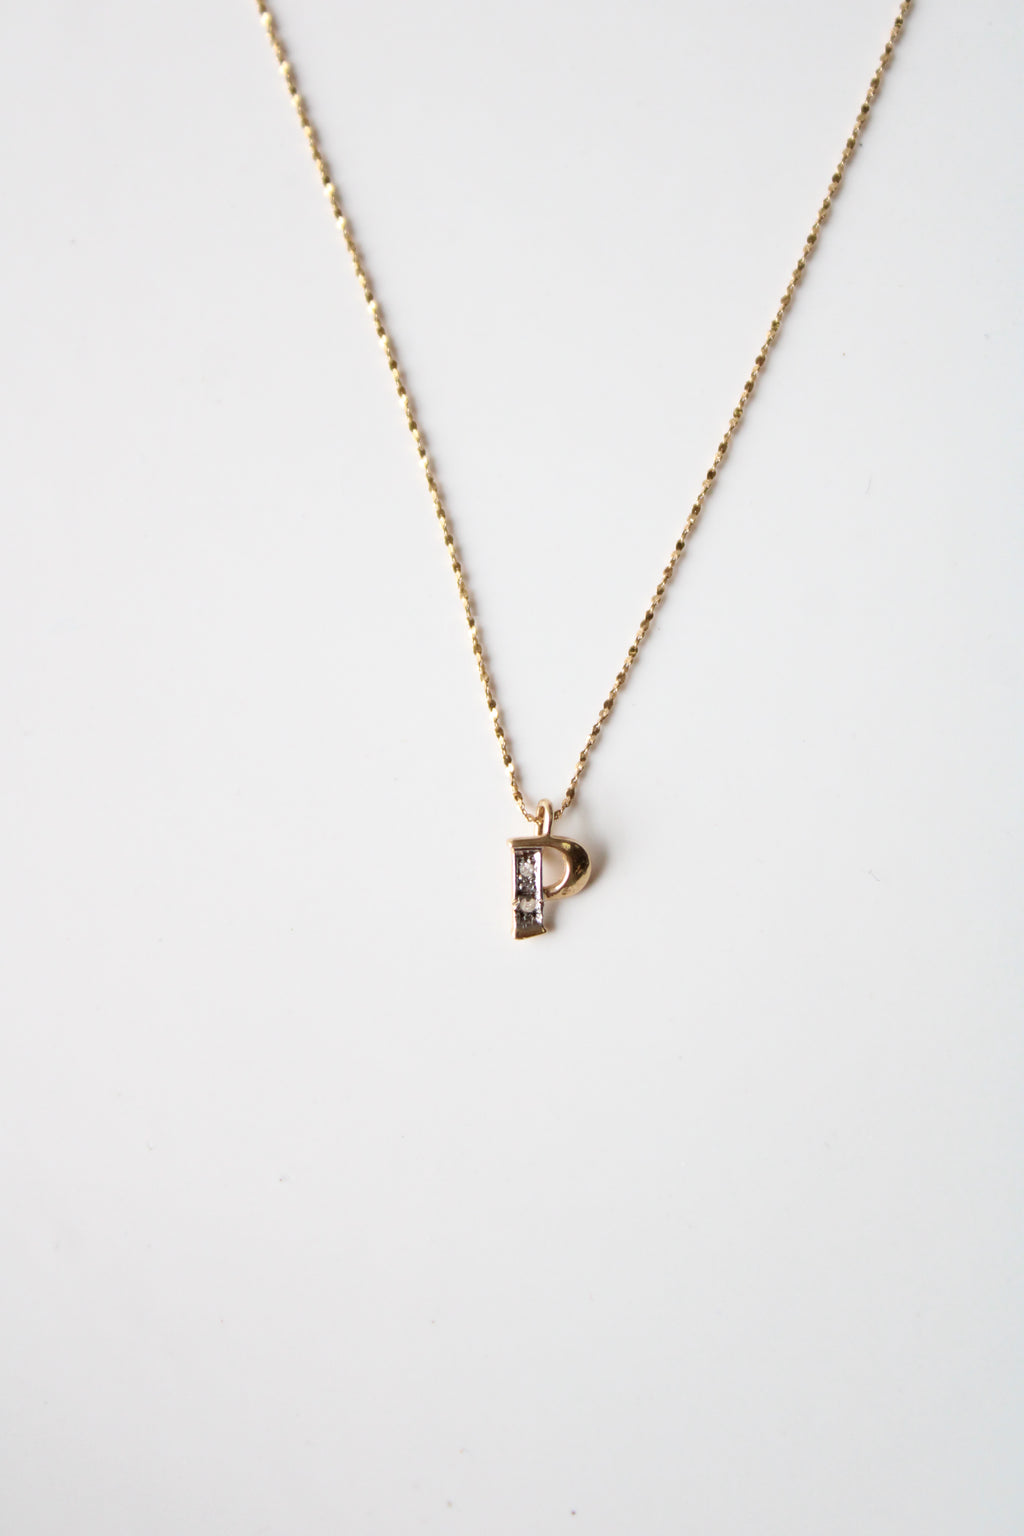 "P" Initial Solid 14KT Gold Pendant Necklace